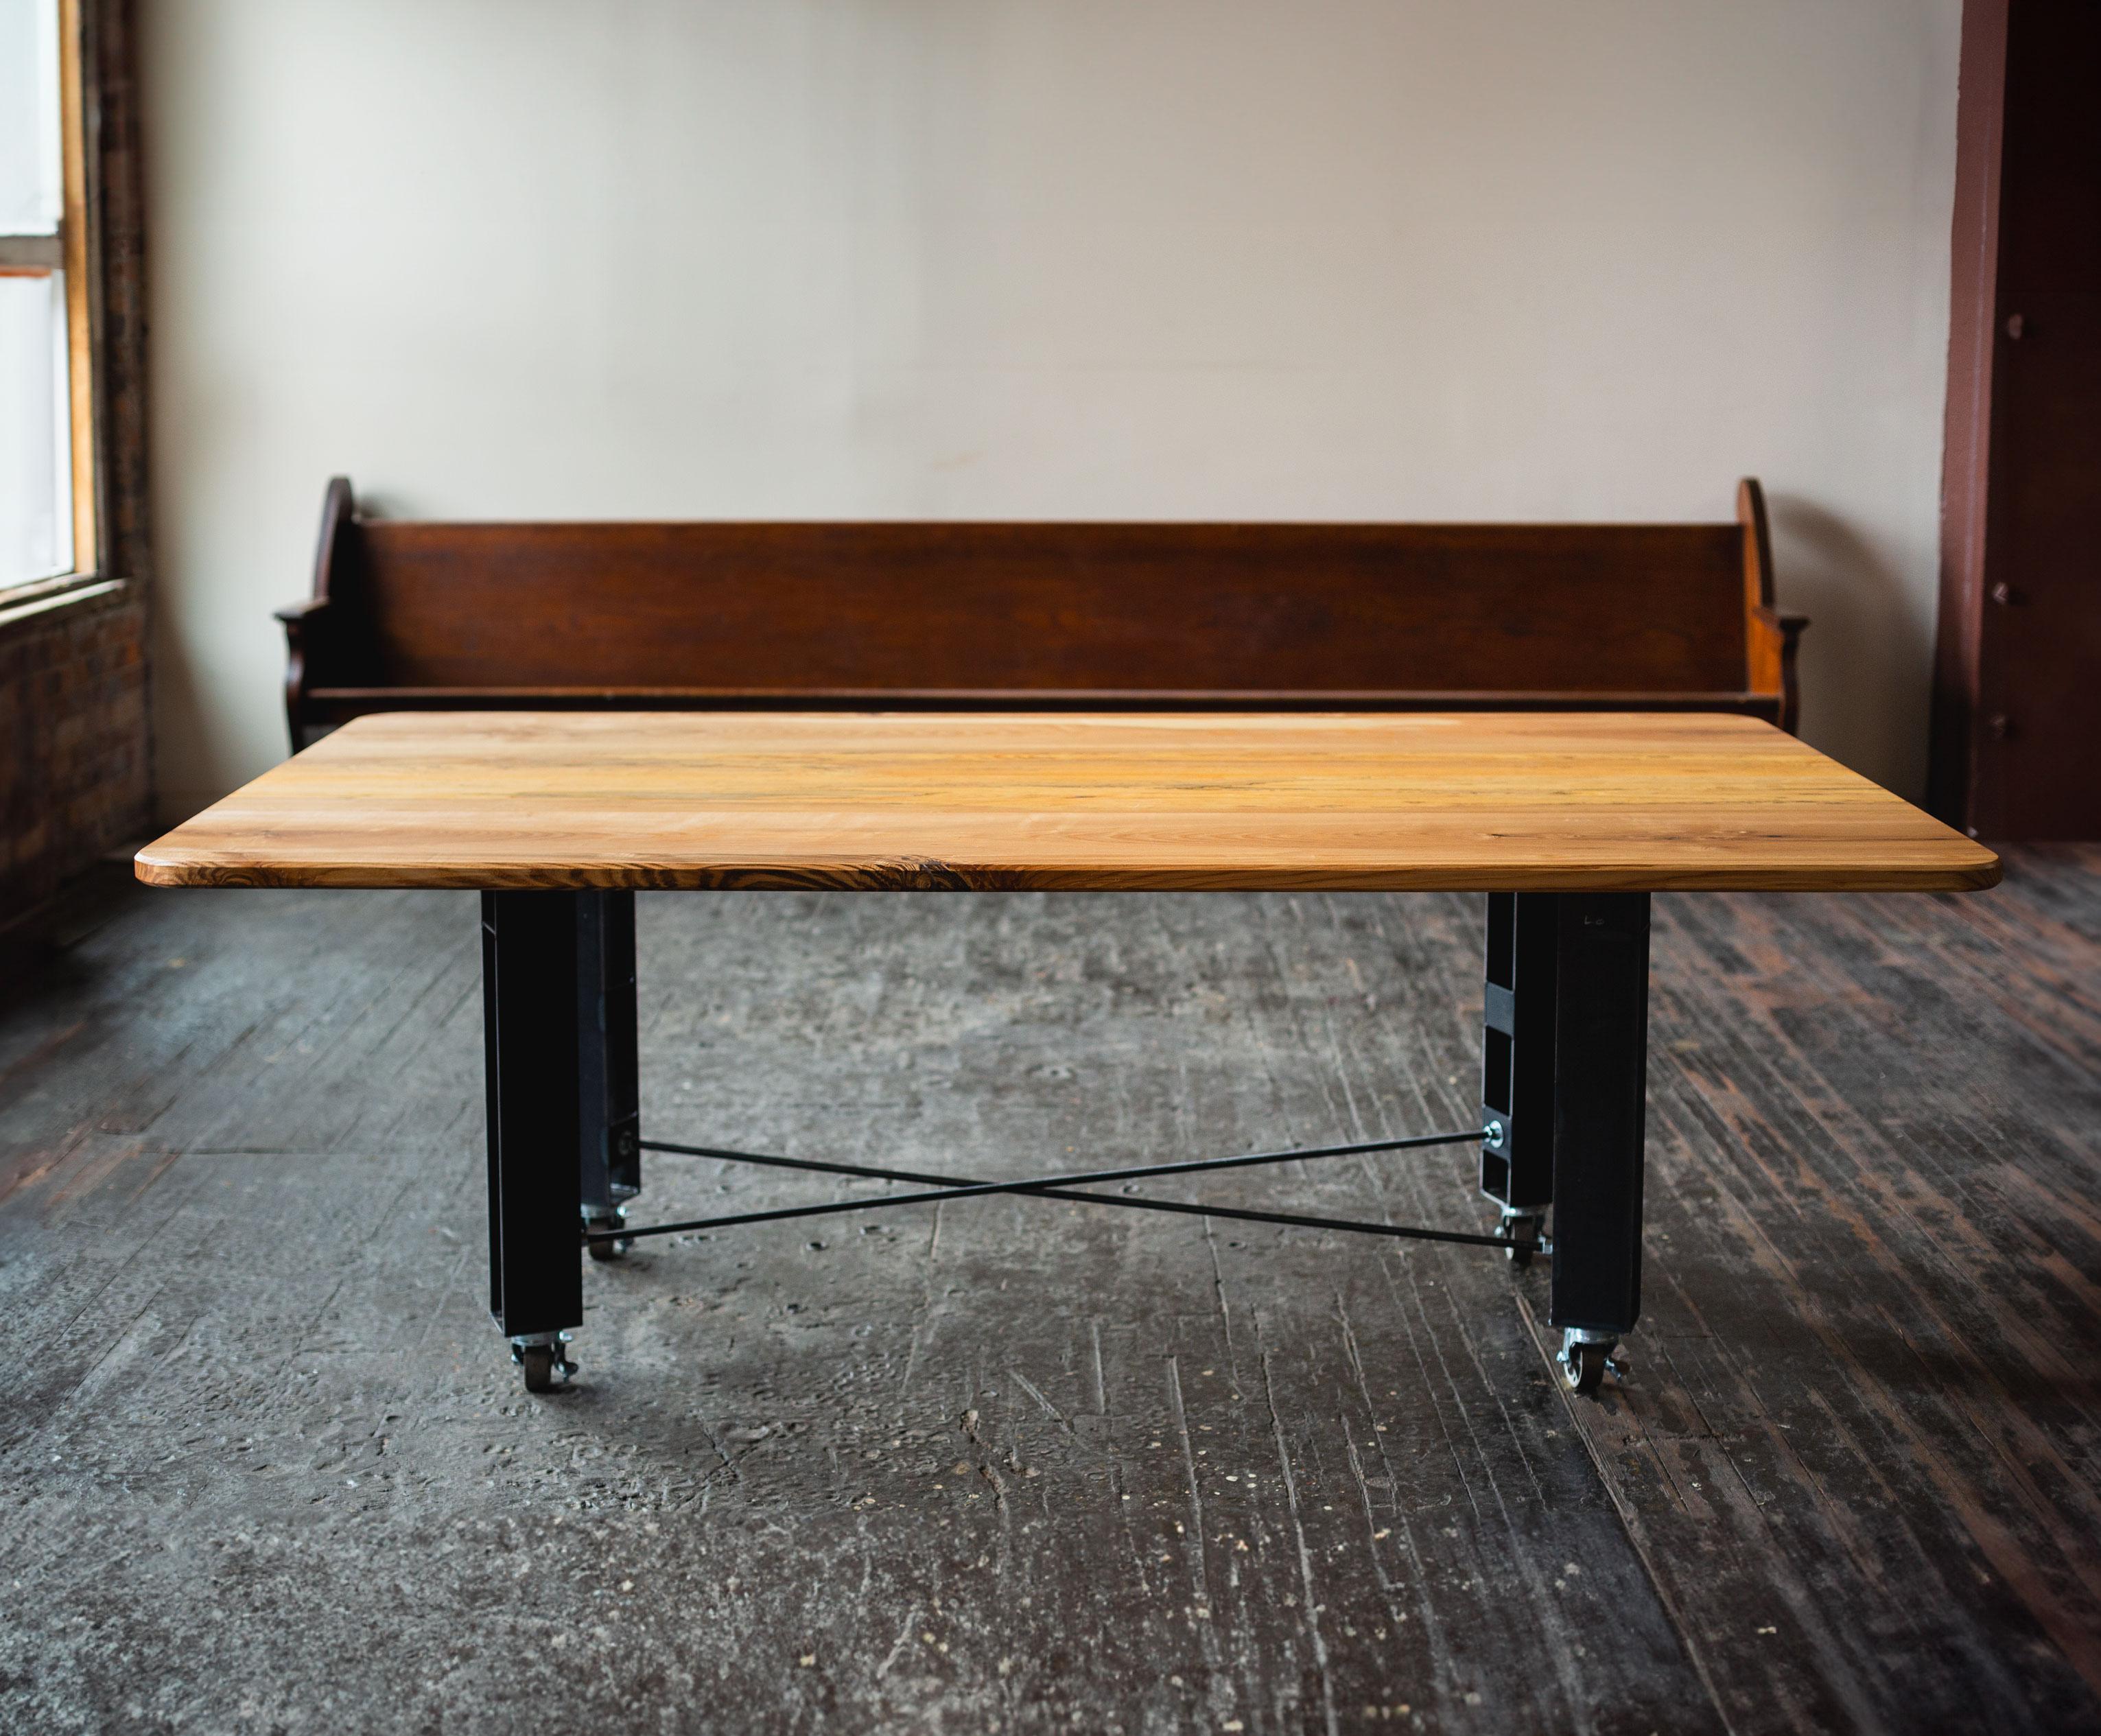 Modern table with an architectural influence, fit for home dining or office meetings.
Solid wood top, steel legs and industrial caster hardware.
Designed, built, and finished in our studio from start to finish.

DIMENSIONS
84” long x 48” wide x 30”